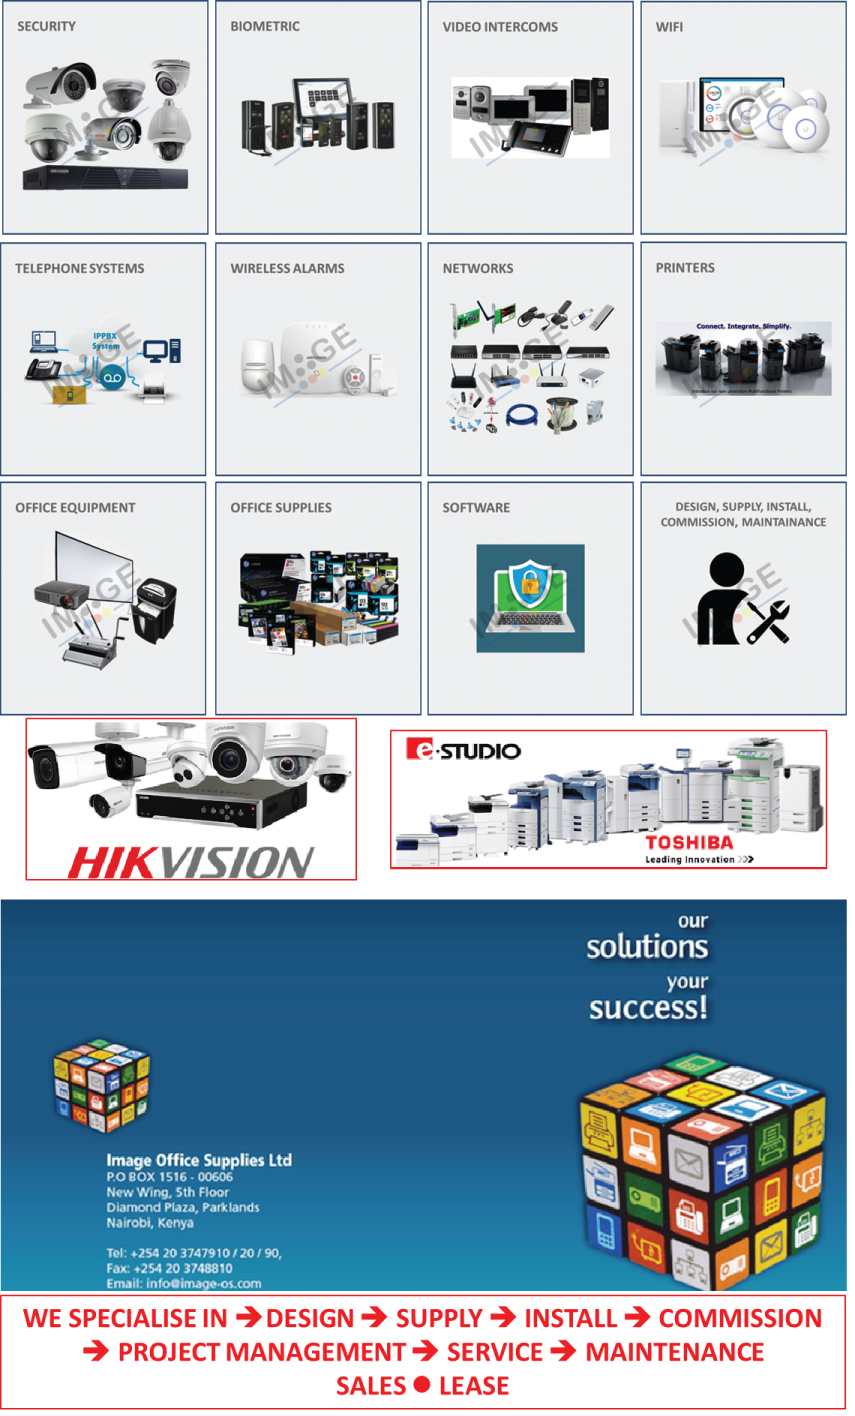 Image Office Supplies Ltd. – Our Solutions, Your Success!